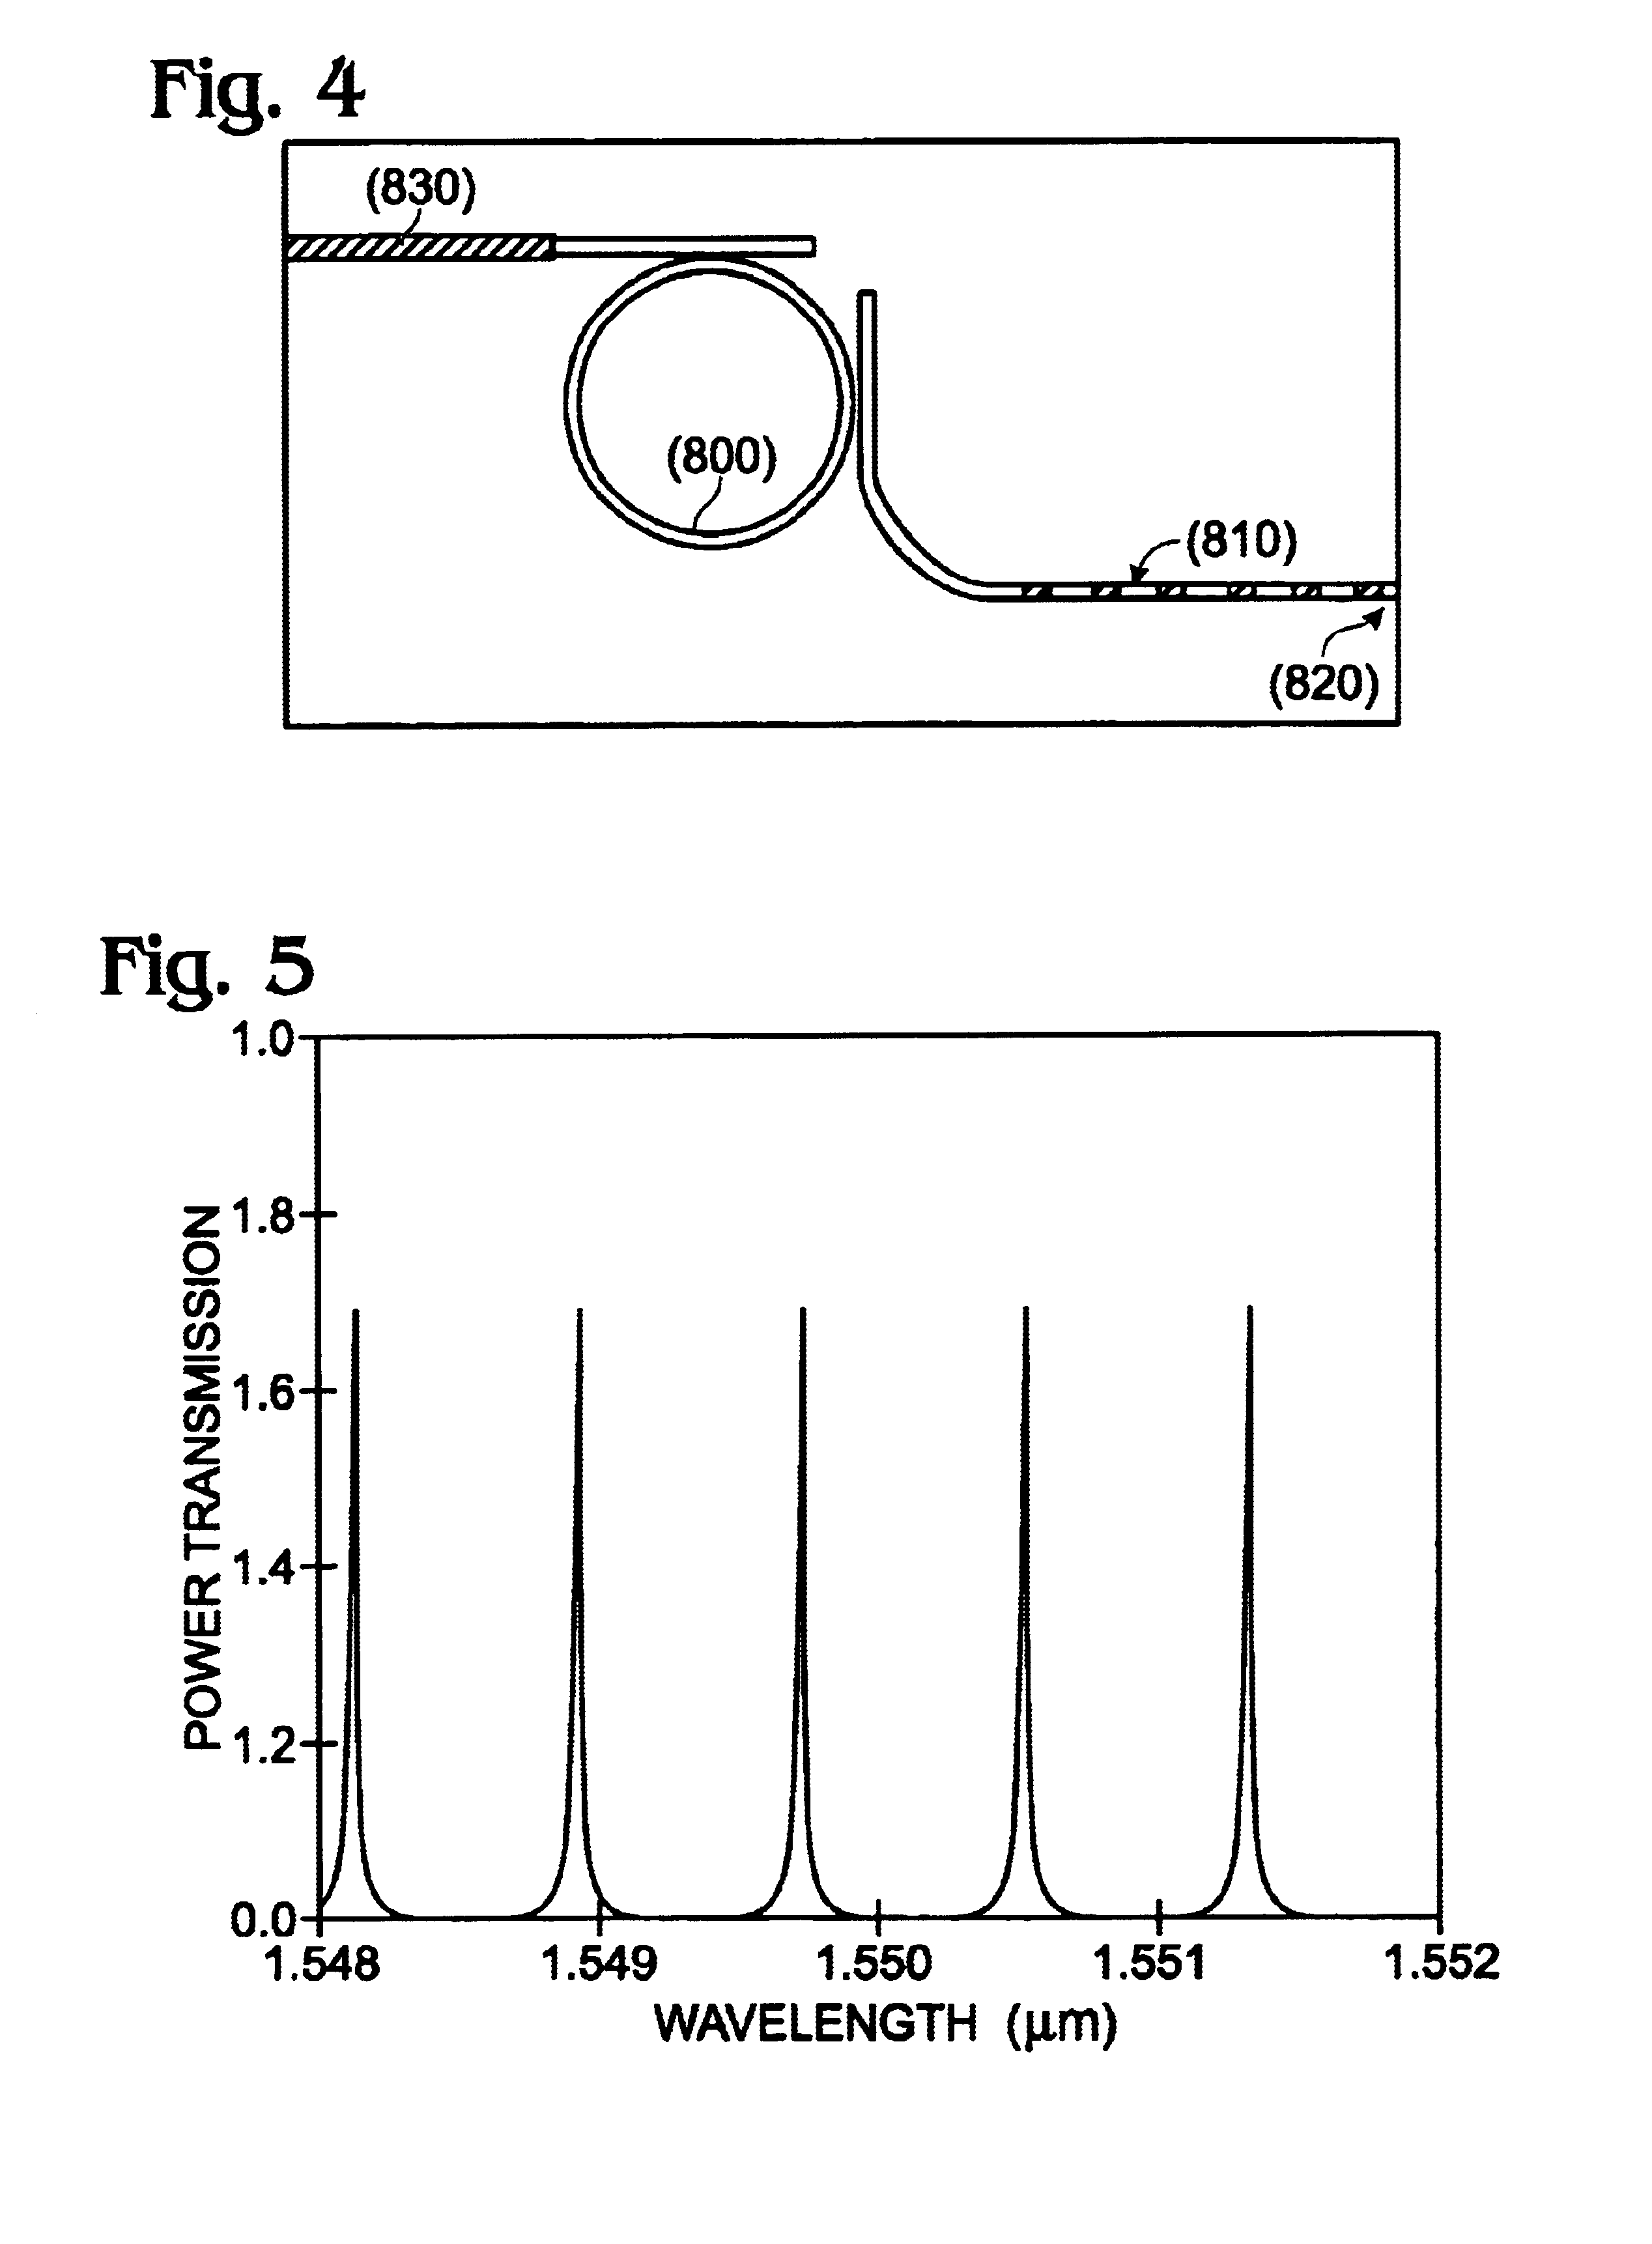 Widely wavelength tunable integrated semiconductor device and method for widely tuning semiconductor devices